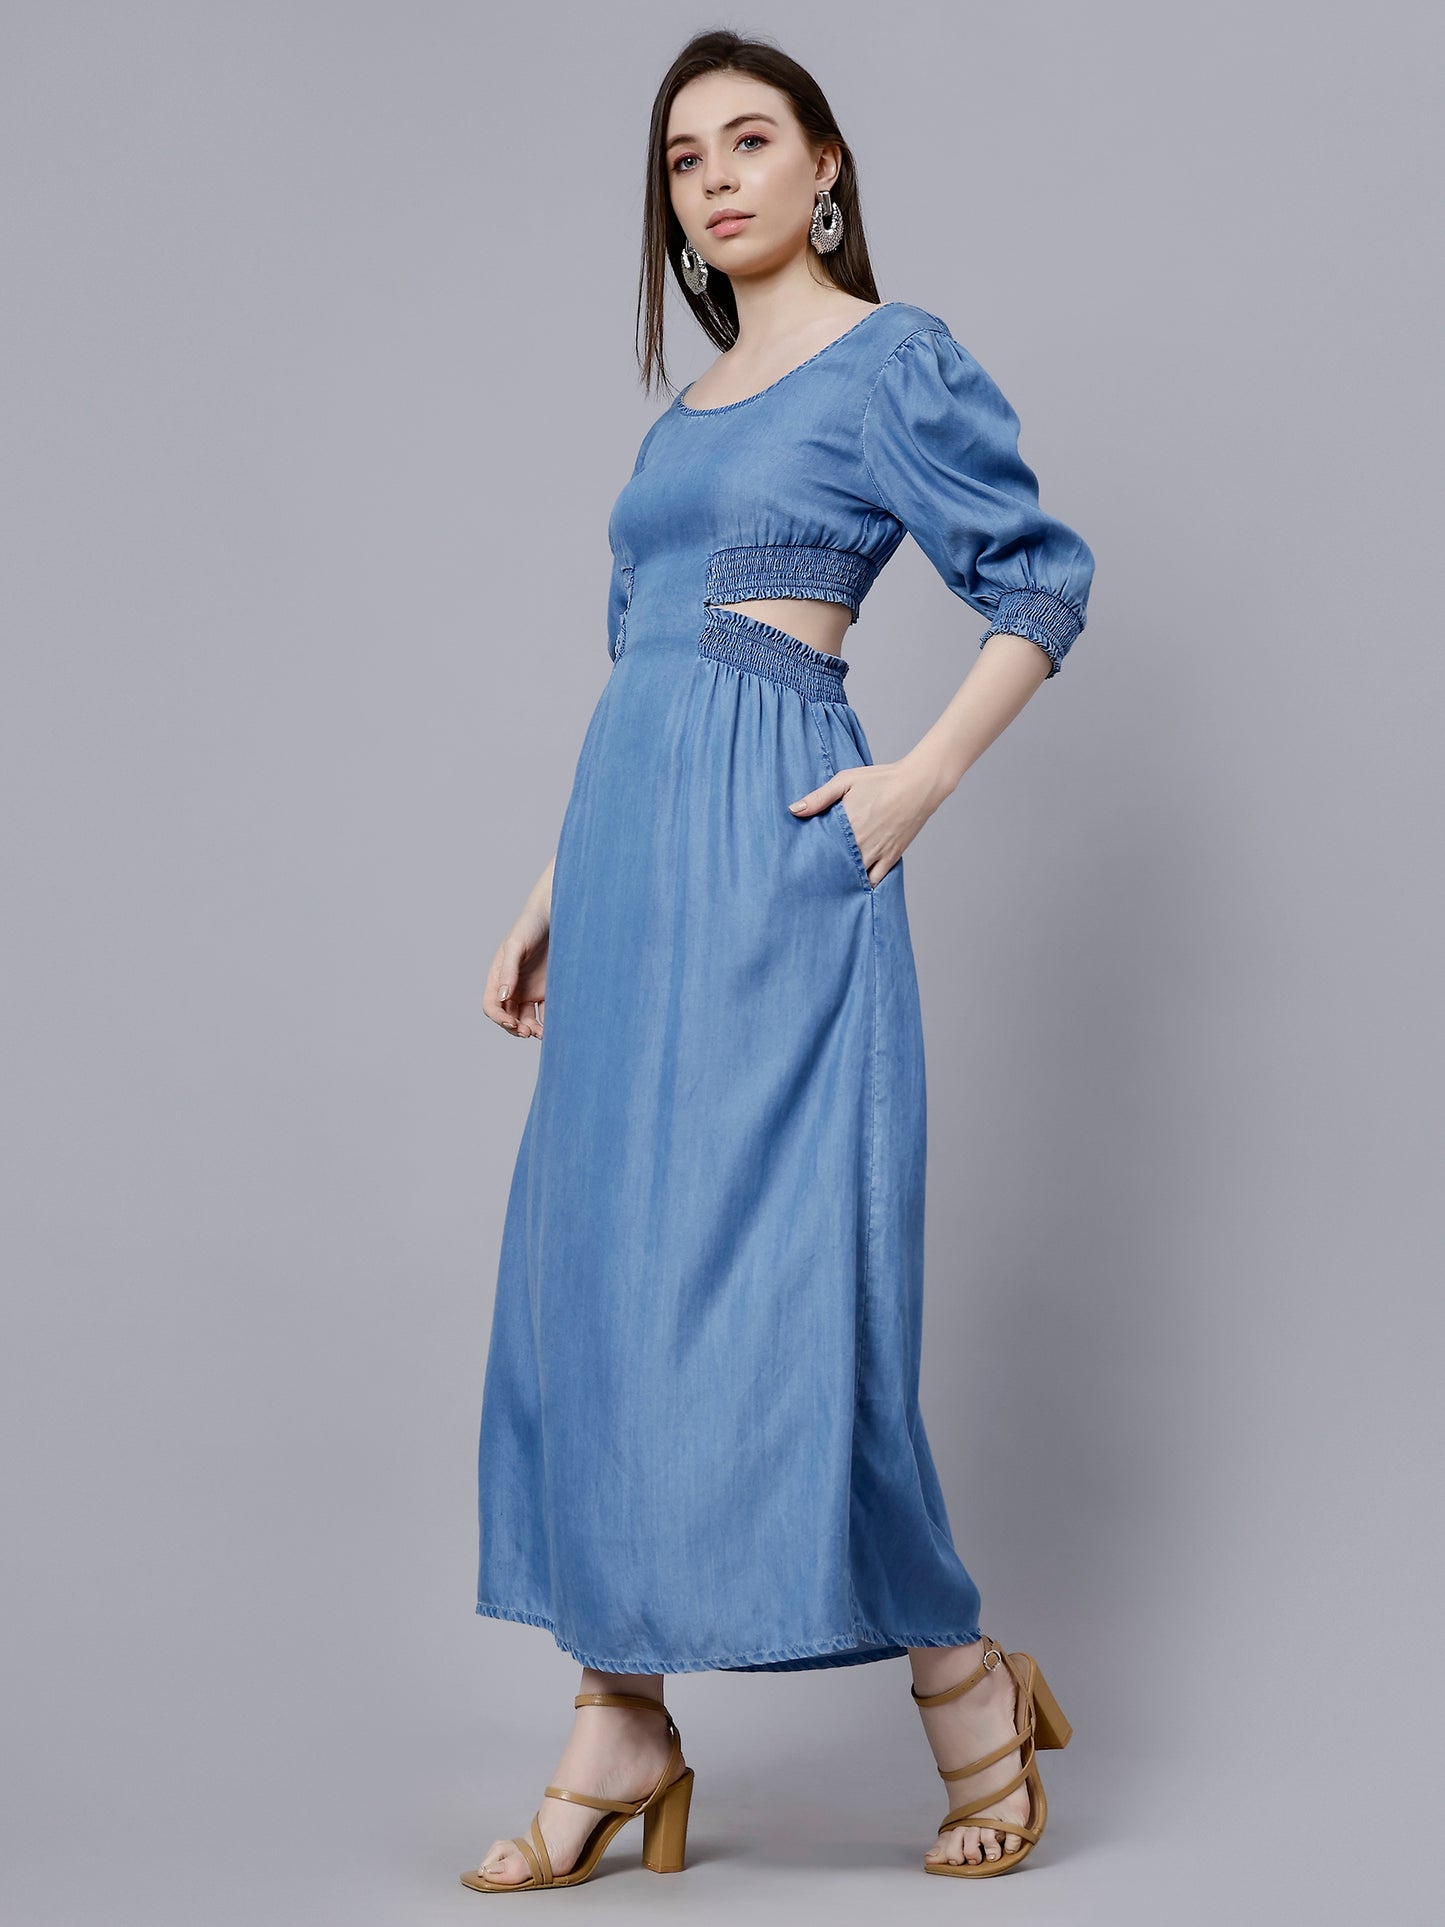 Denim Dress With A Cut-Out On The Waist